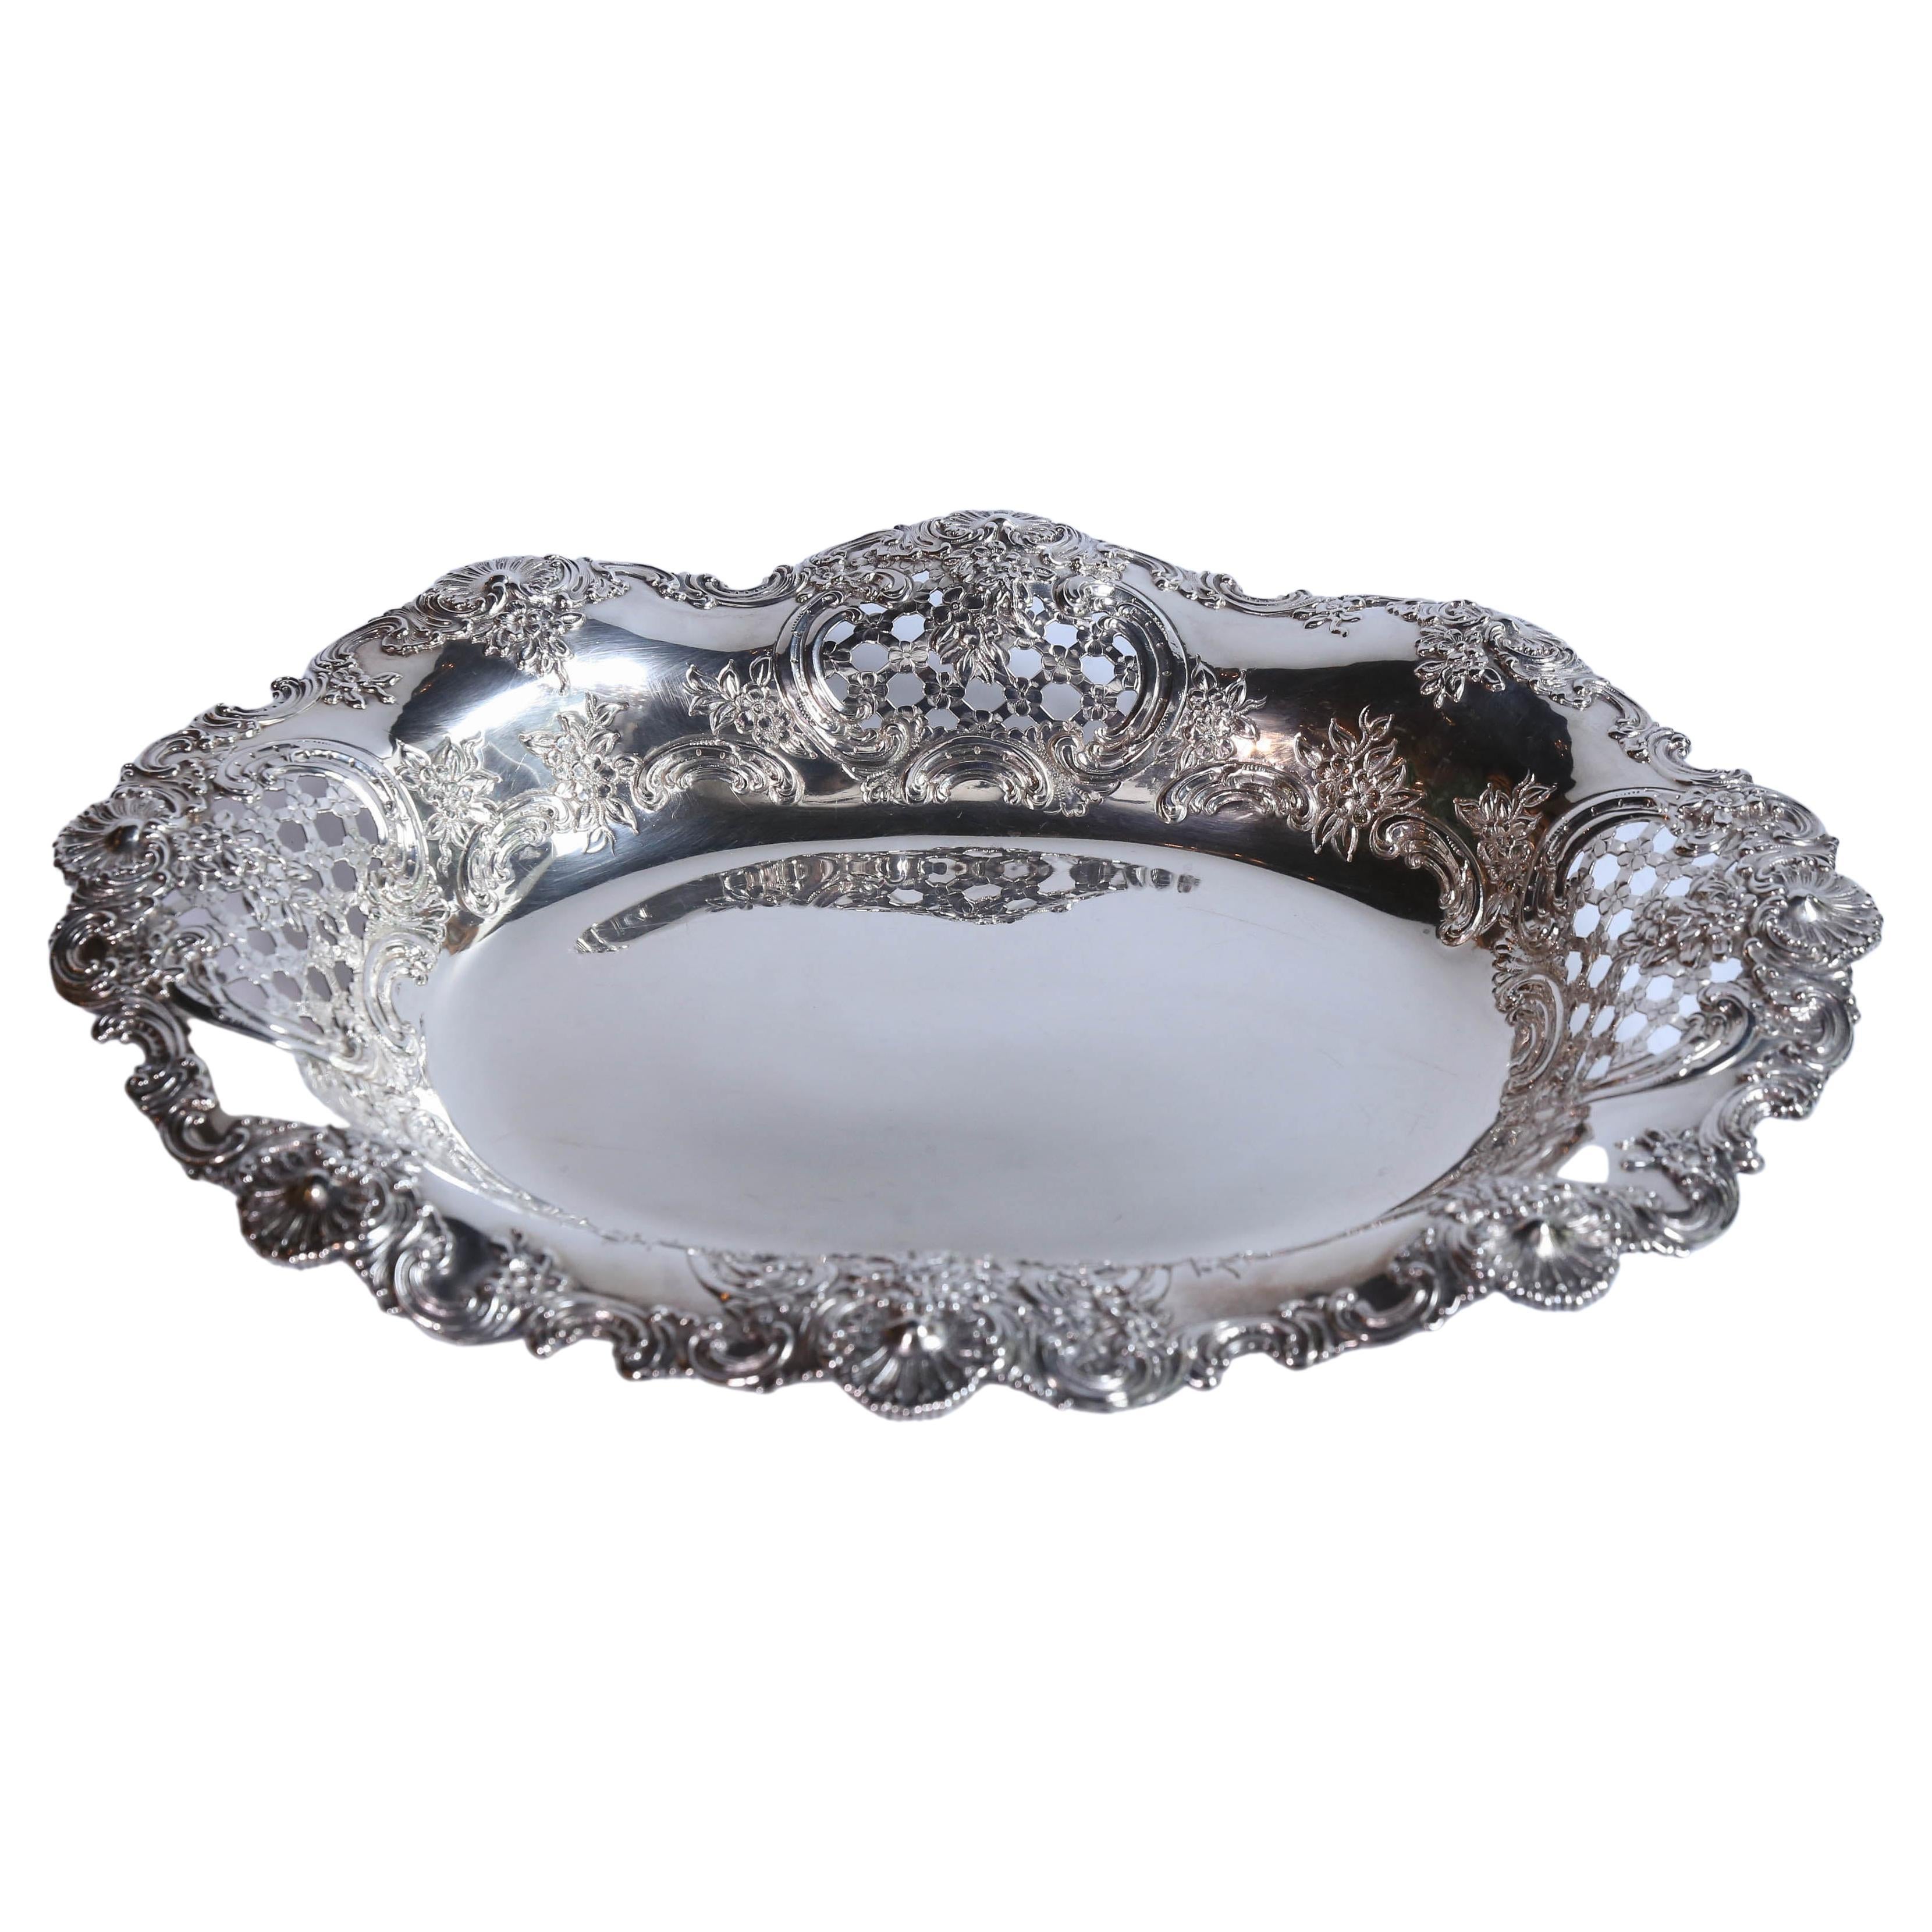 Tiffany and Co. Sterling Silver Oval Serving Tray